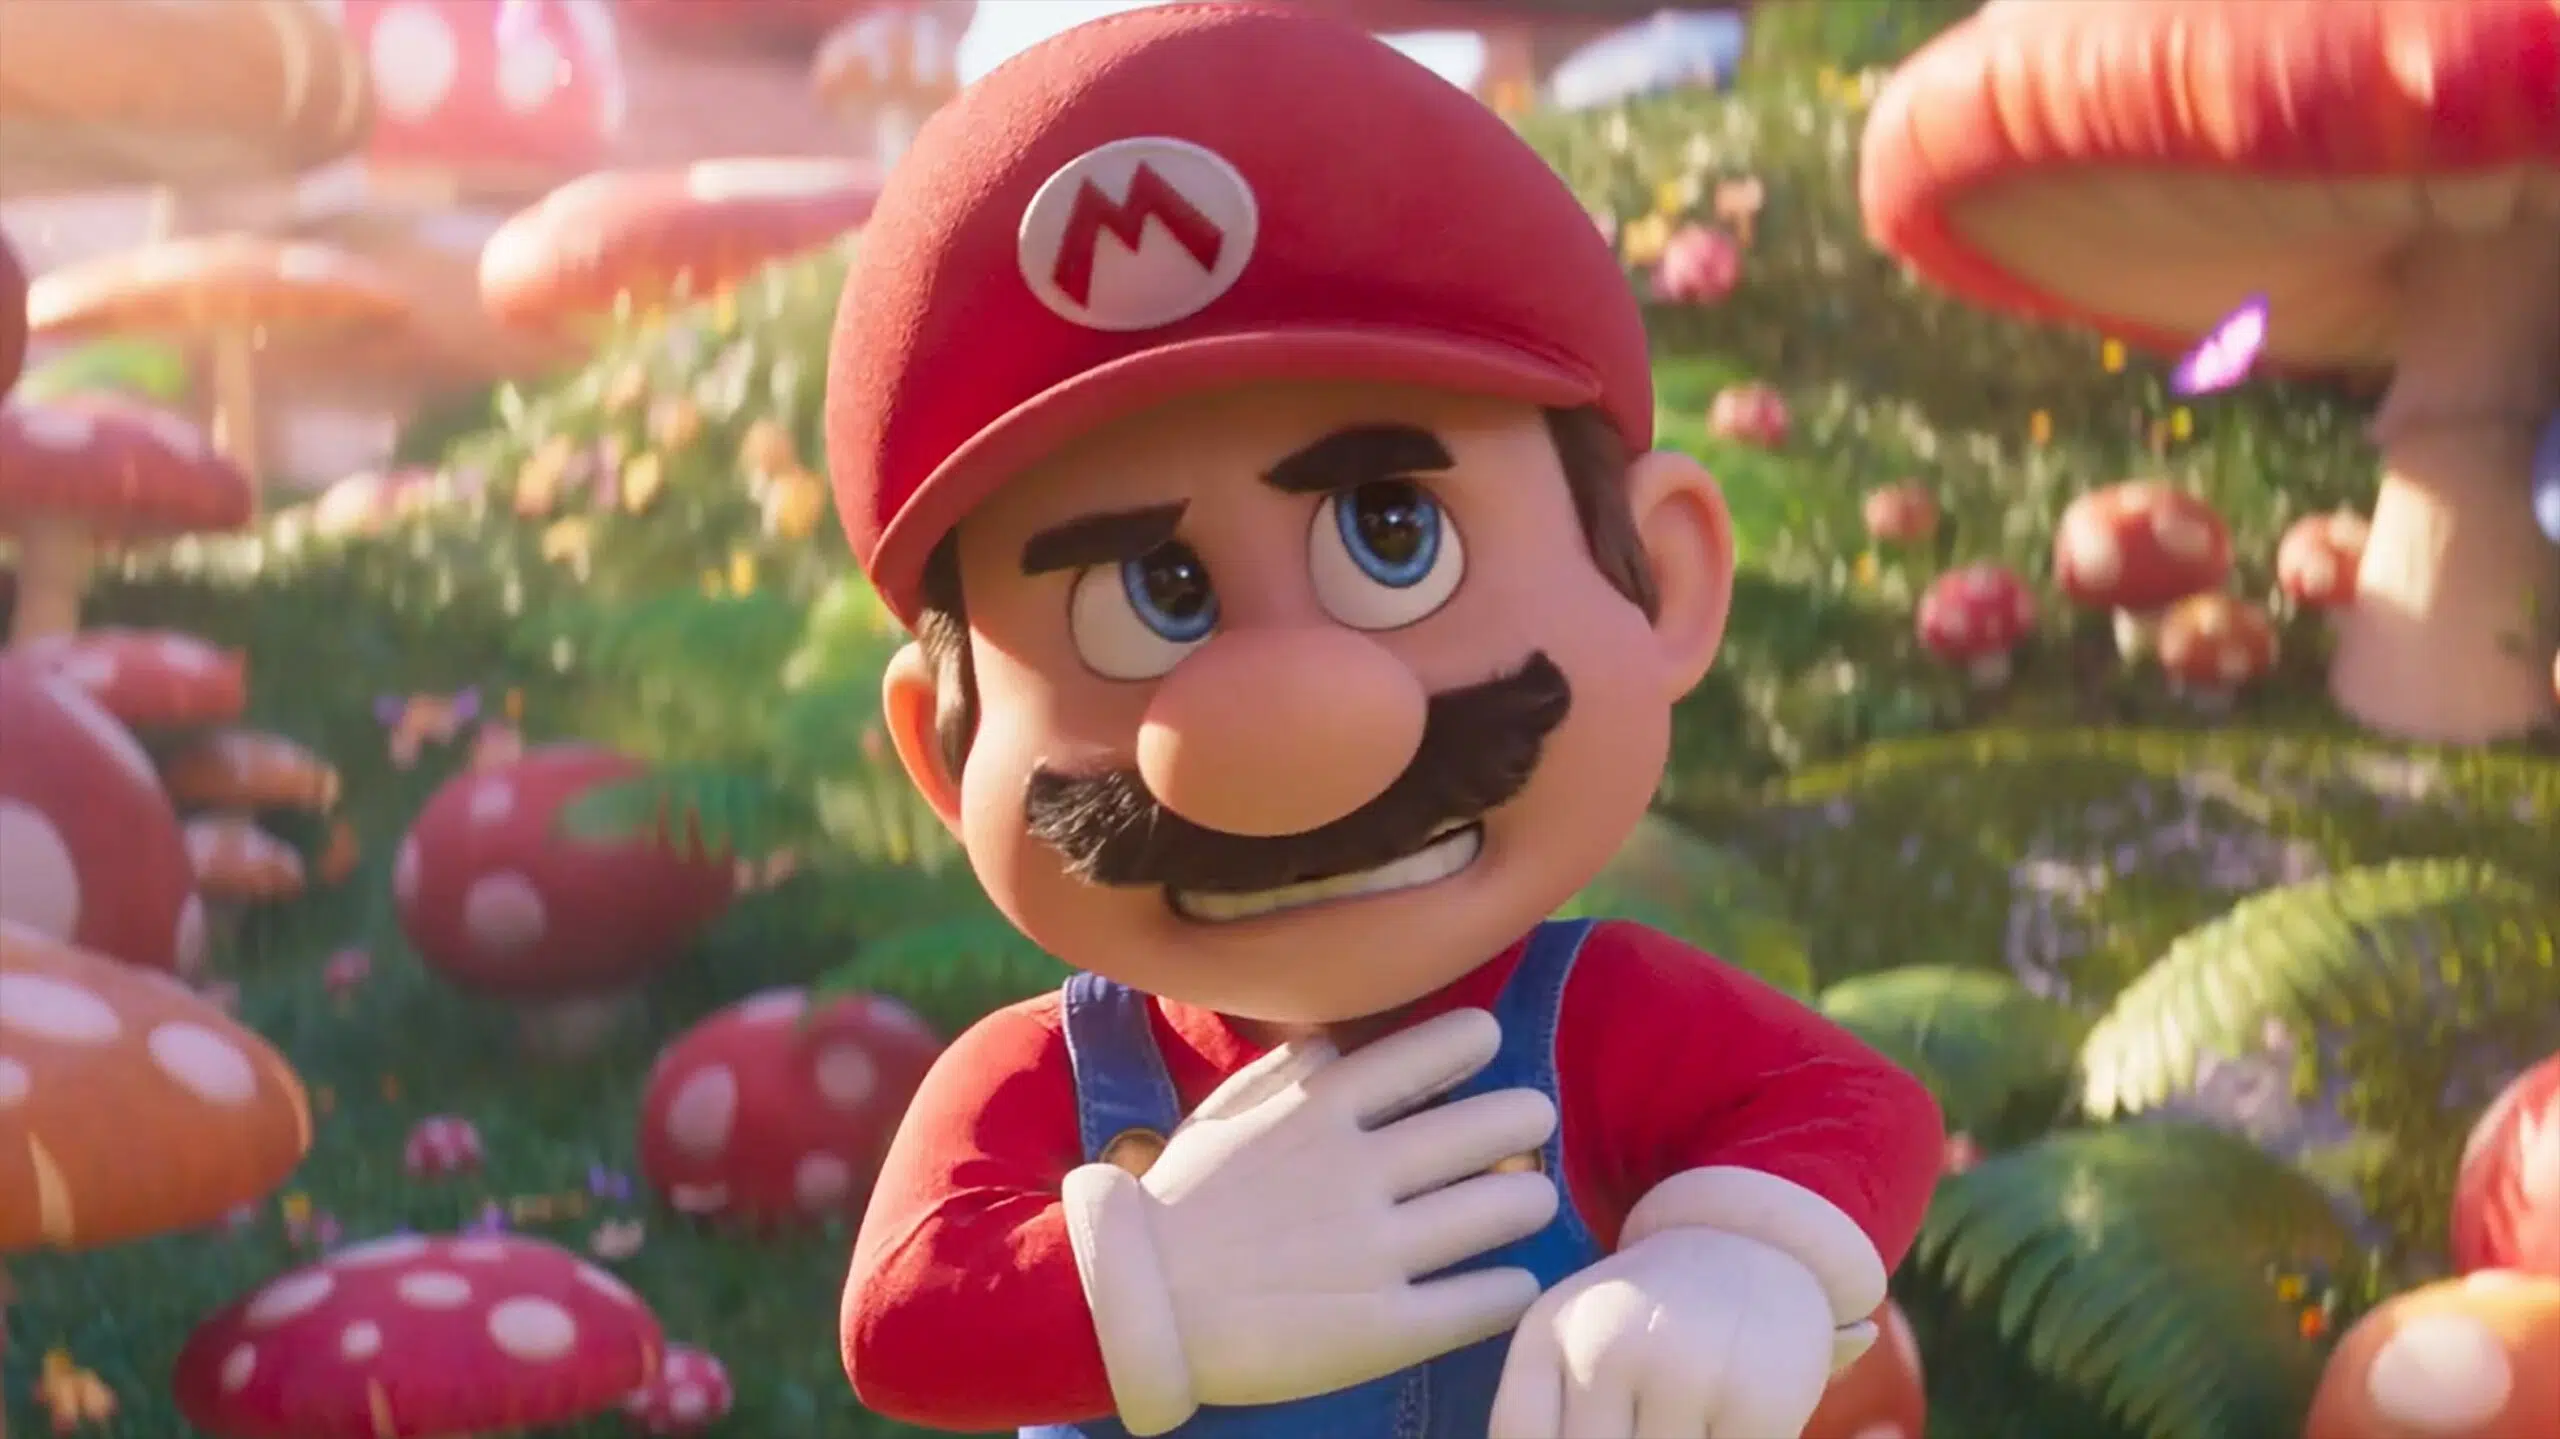 (Watch) Trailer for “The Super Mario Bros.” Movie Released ENERGY 106